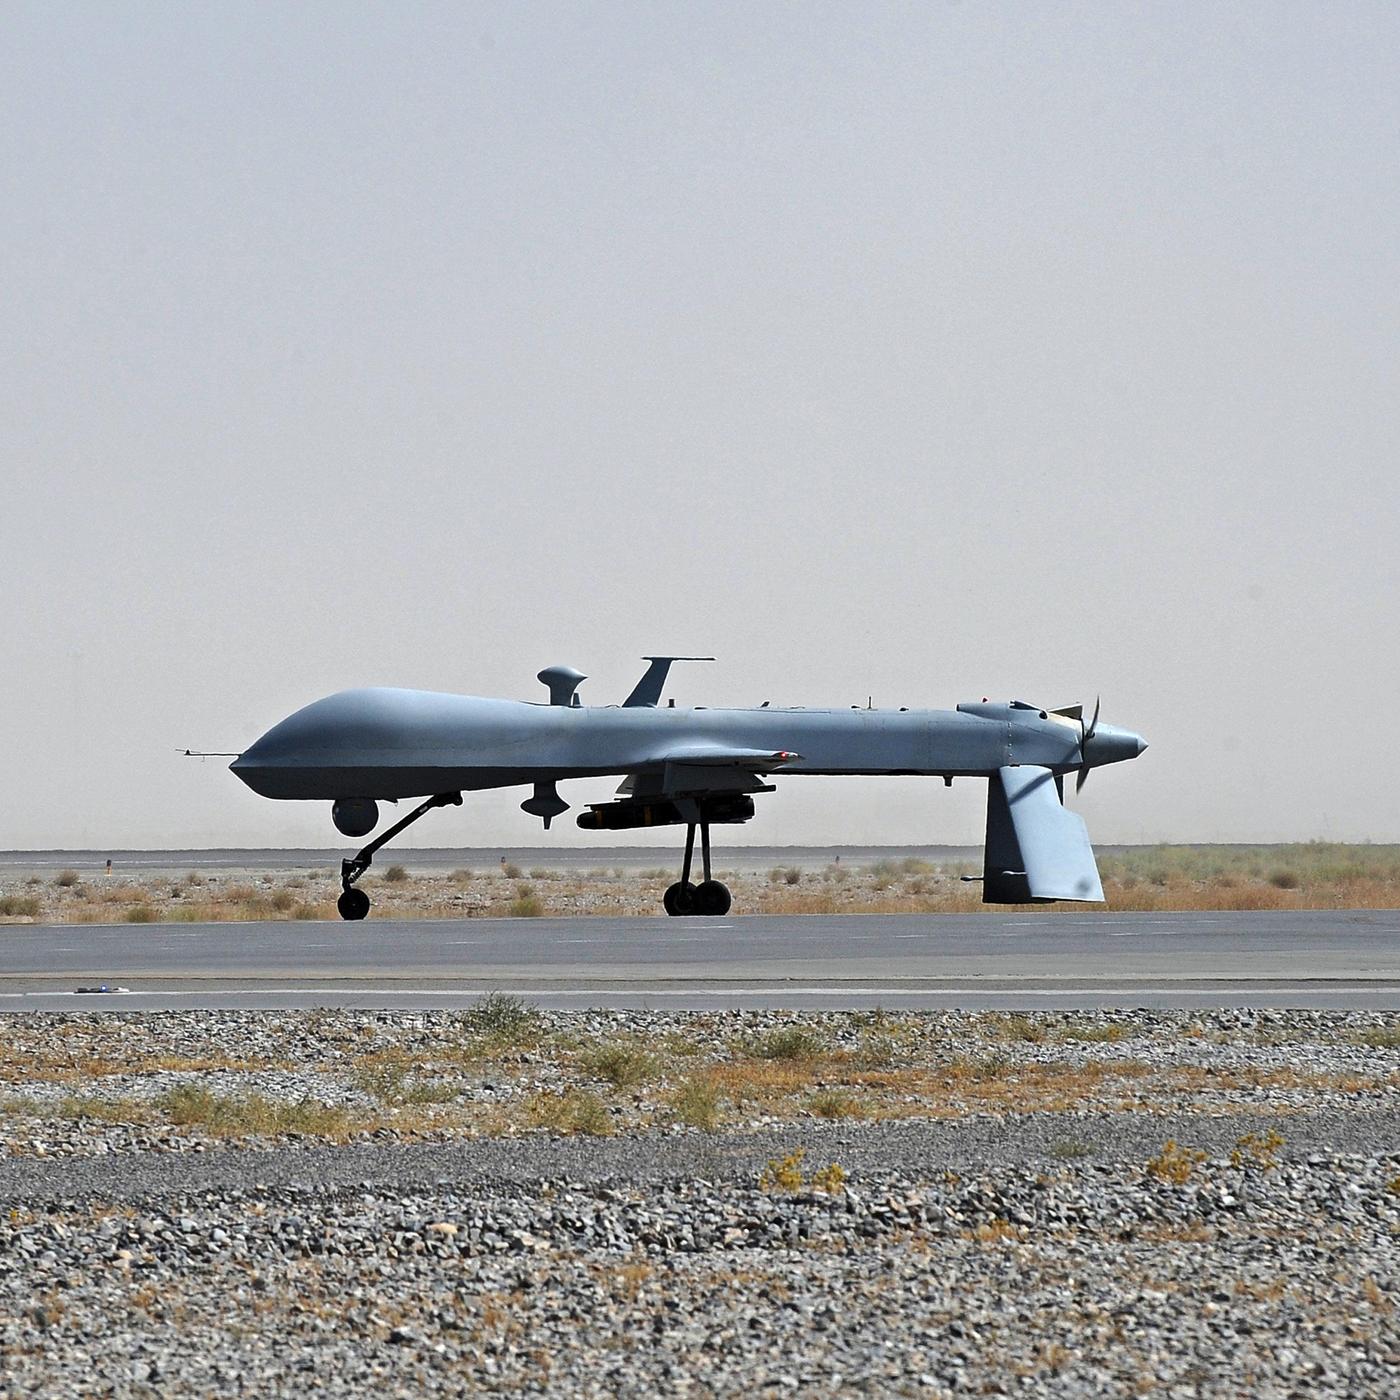 Student Tweets U.S. Drone Strikes, Highlights "Double Tap" Tactic